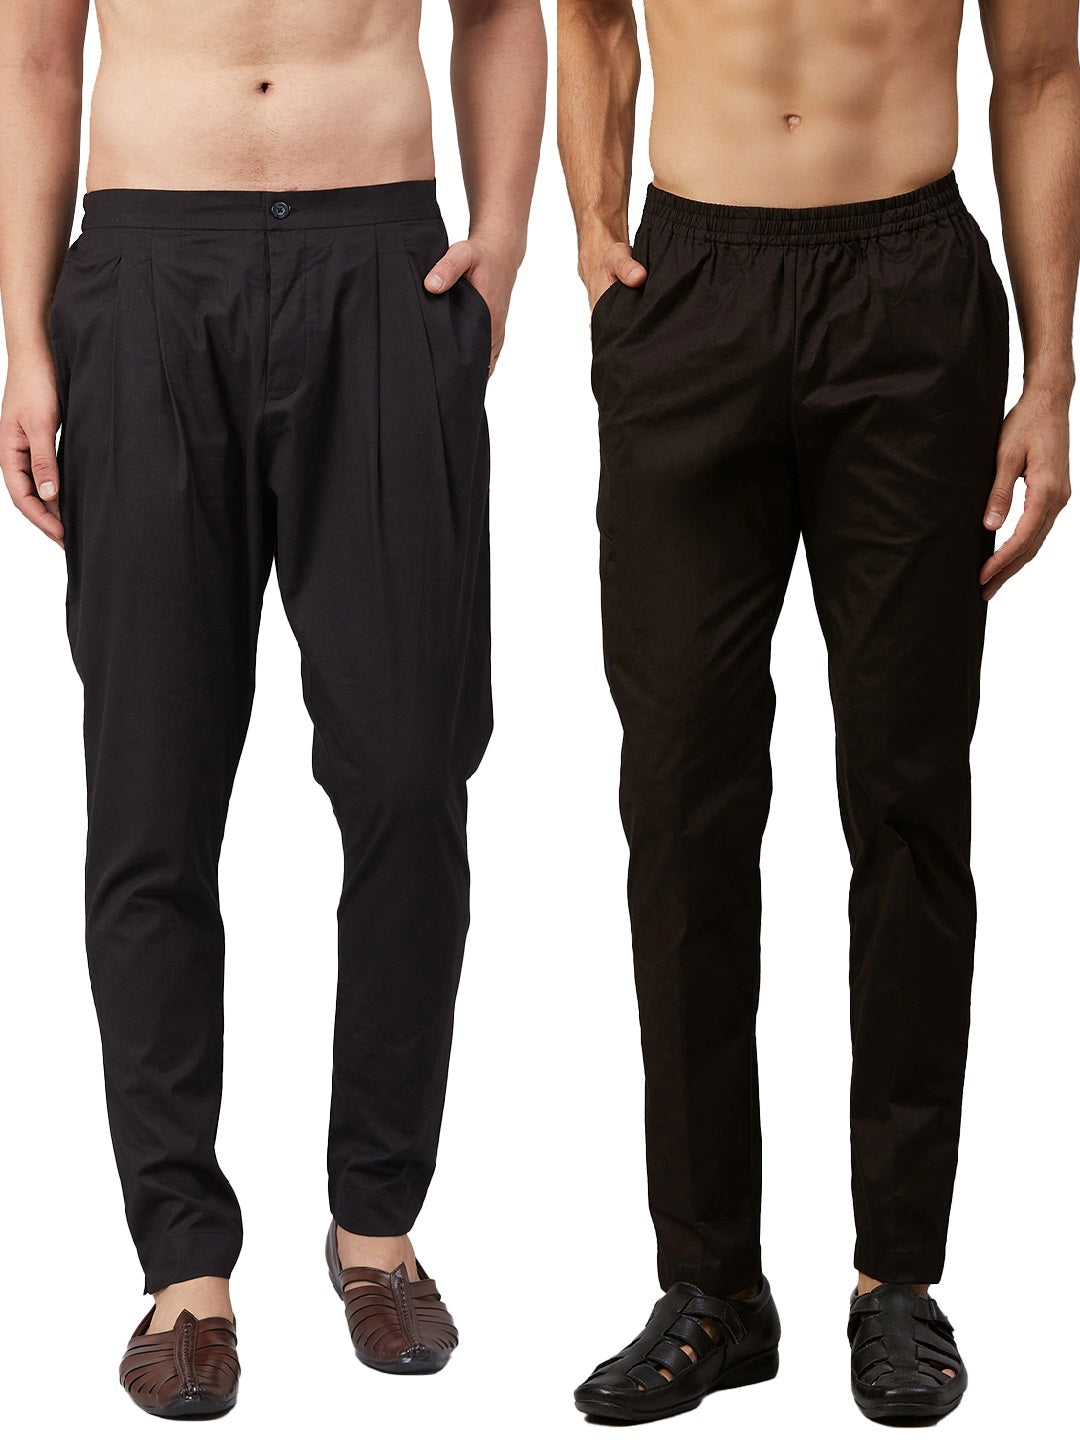 Combo Pack of 2: Black Solid Cotton Pyjama and Cotton Trouser